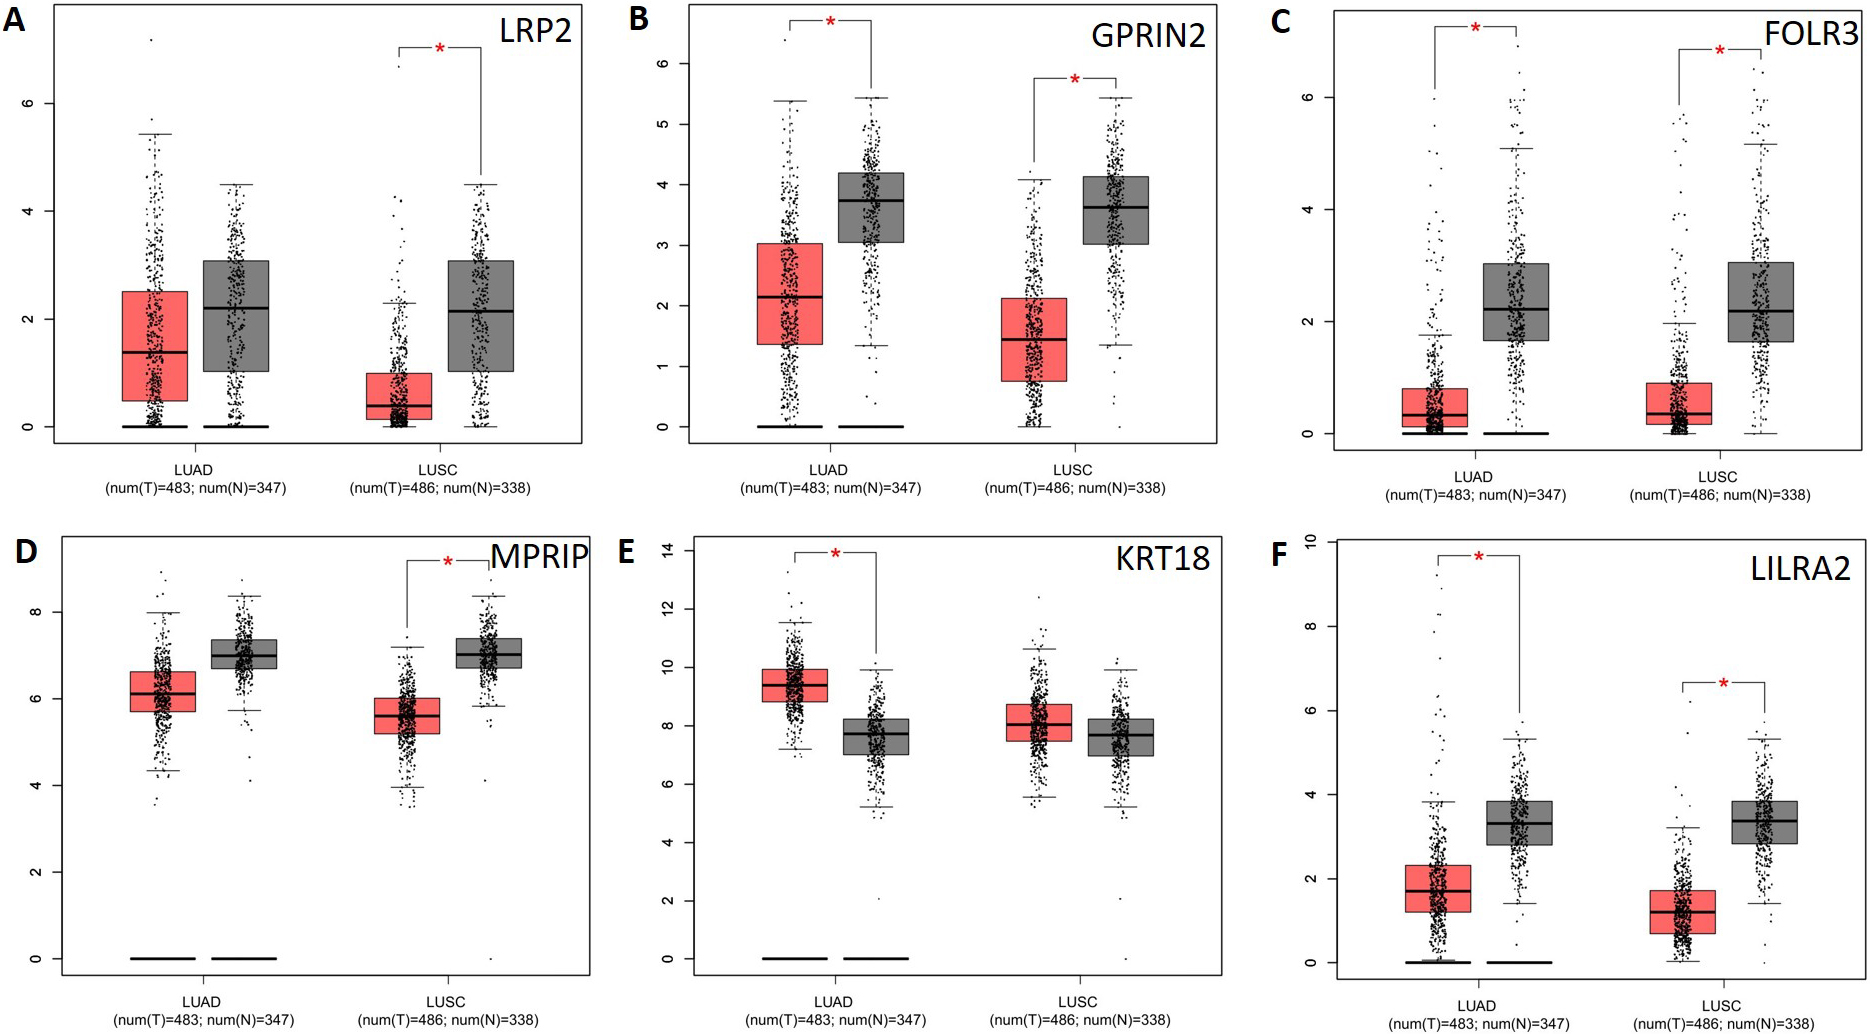 Analysis of potential key genes expression level in NSCLC patients. The red and gray boxes represent cancer and normal tissues, respectively. (A) LRP2; (B) GPRIN2; (C) FOLR3; (D) MPRIP; (E) KRT18 and (F) LILRA2; LUAD: Lung adenocarcinoma; LUSC: Lung squamous cell carcinomas.